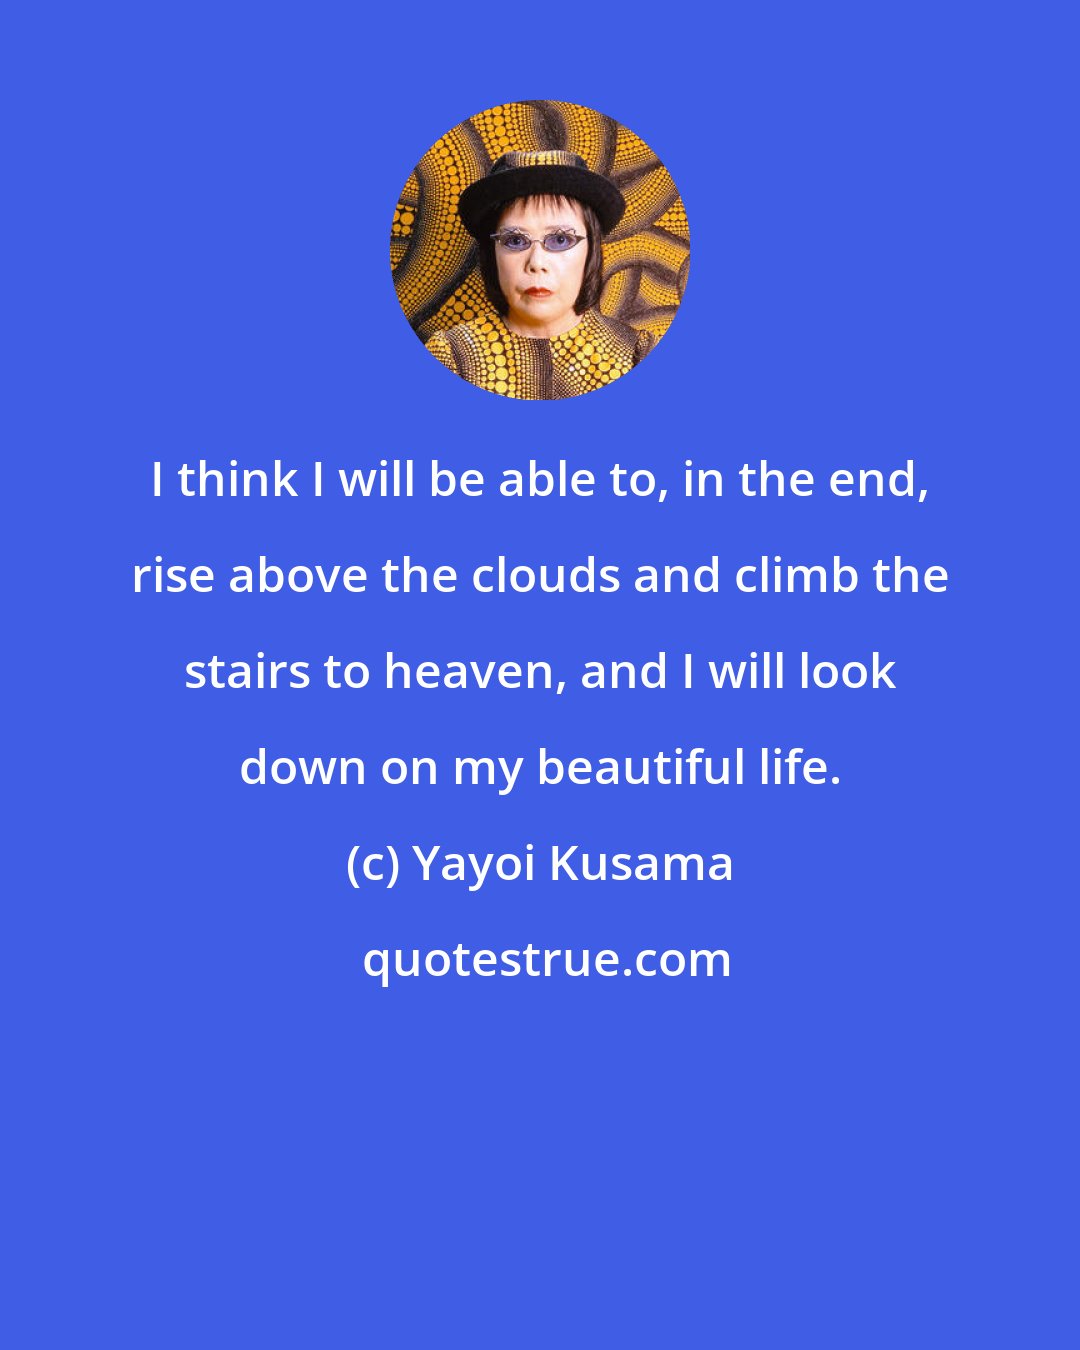 Yayoi Kusama: I think I will be able to, in the end, rise above the clouds and climb the stairs to heaven, and I will look down on my beautiful life.